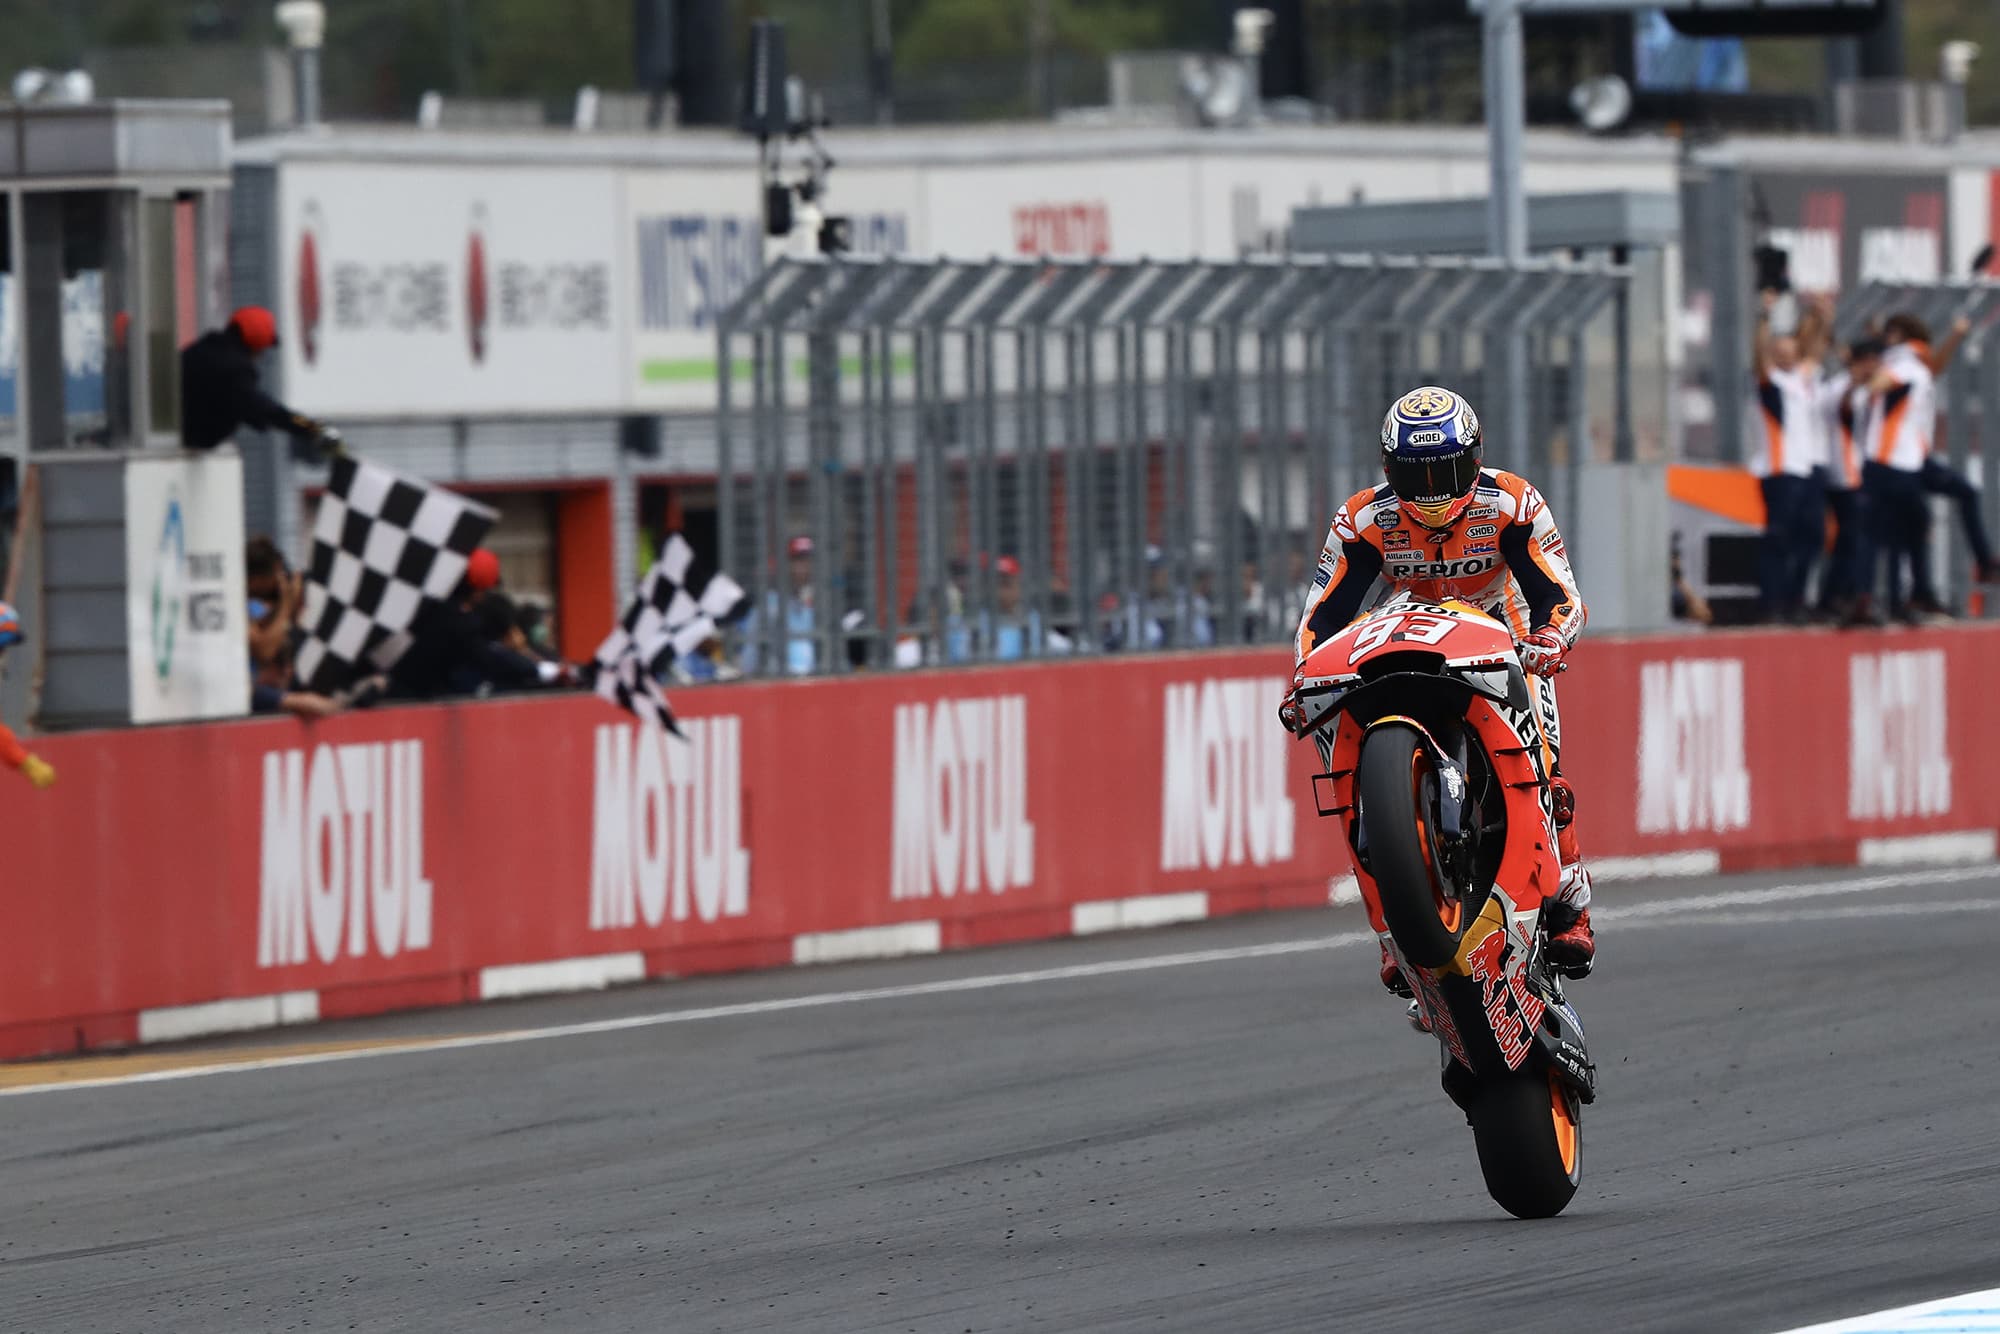 Marc Marquez takes the chequered flag with a wheelie to win the 2019 MotoGP Grand Prix of Japan